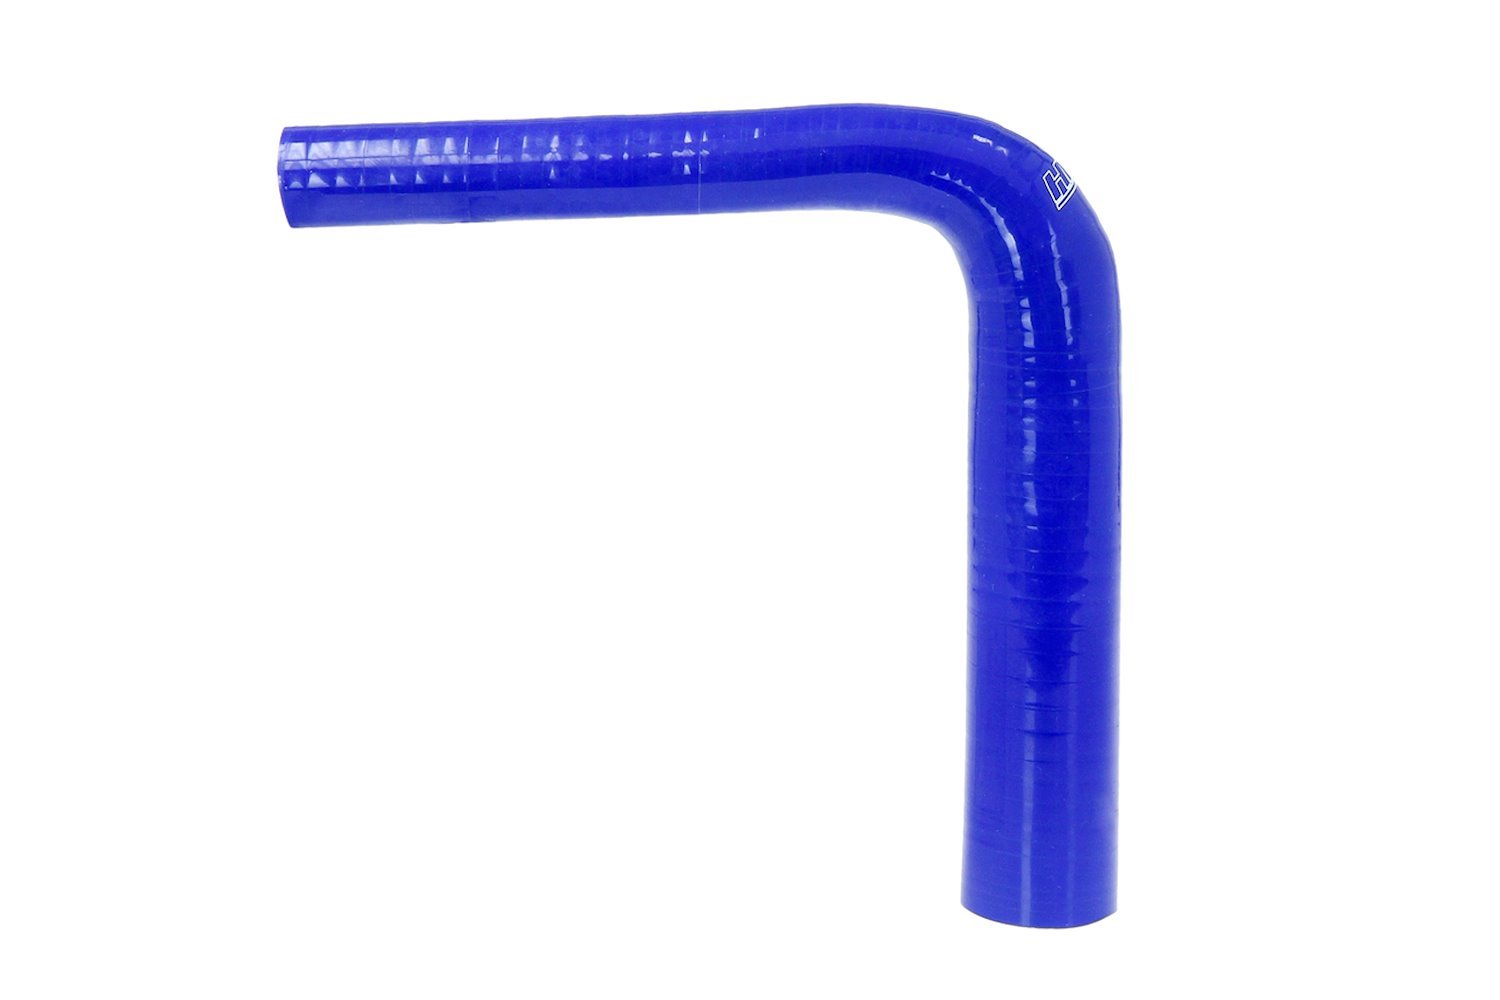 HTSER90-062-125-BLUE Silicone 90-Degree Elbow Hose, High-Temp 4-Ply Reinforced, 5/8 in. - 1-1/4 in. ID, Blue